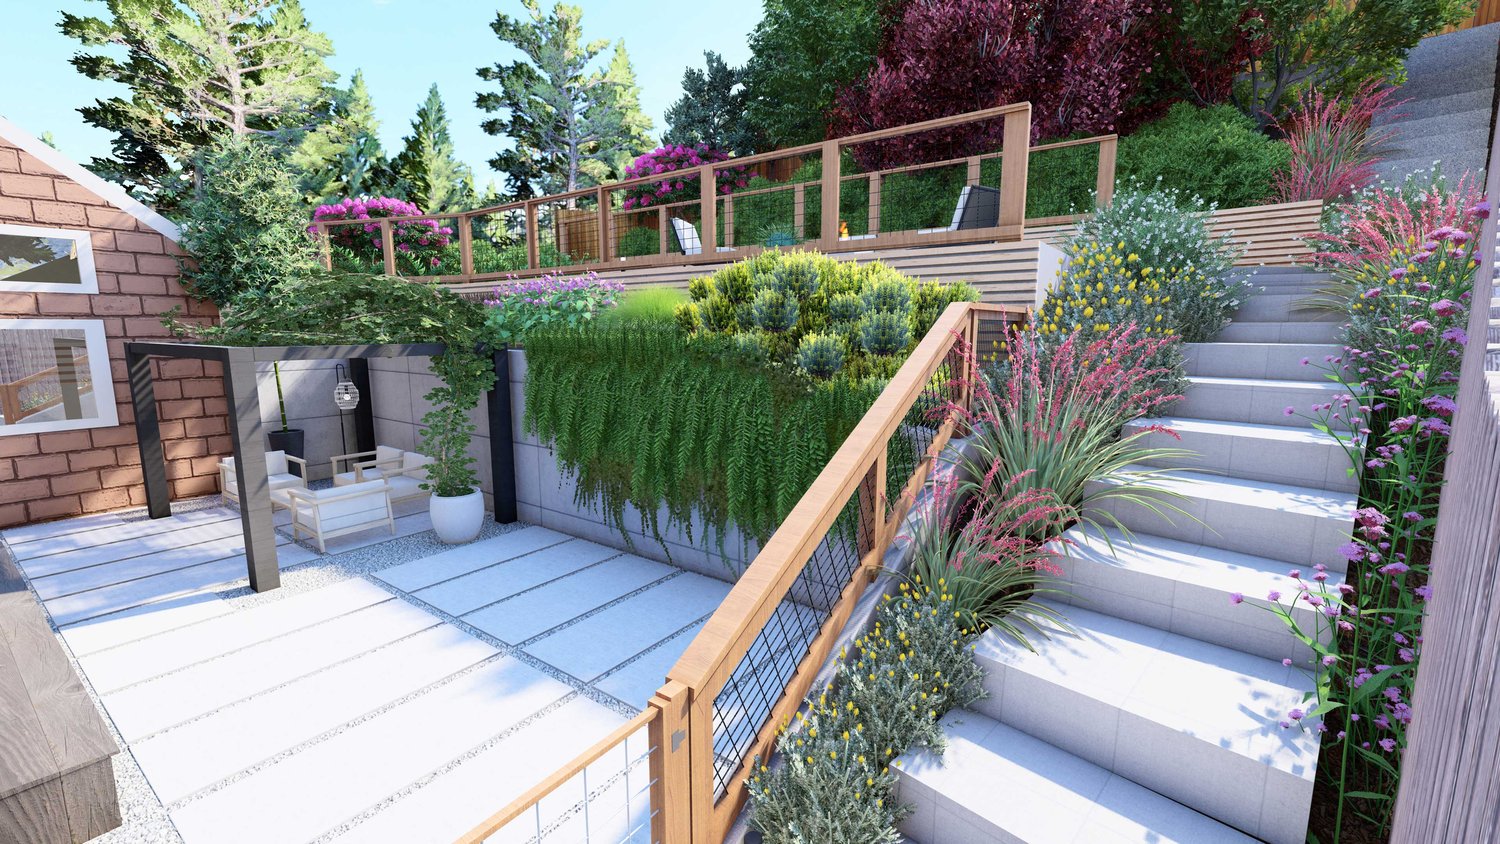 Mill Valley backyard showing gravel and paver patio with pergola over seating area, decorated stairway and plants